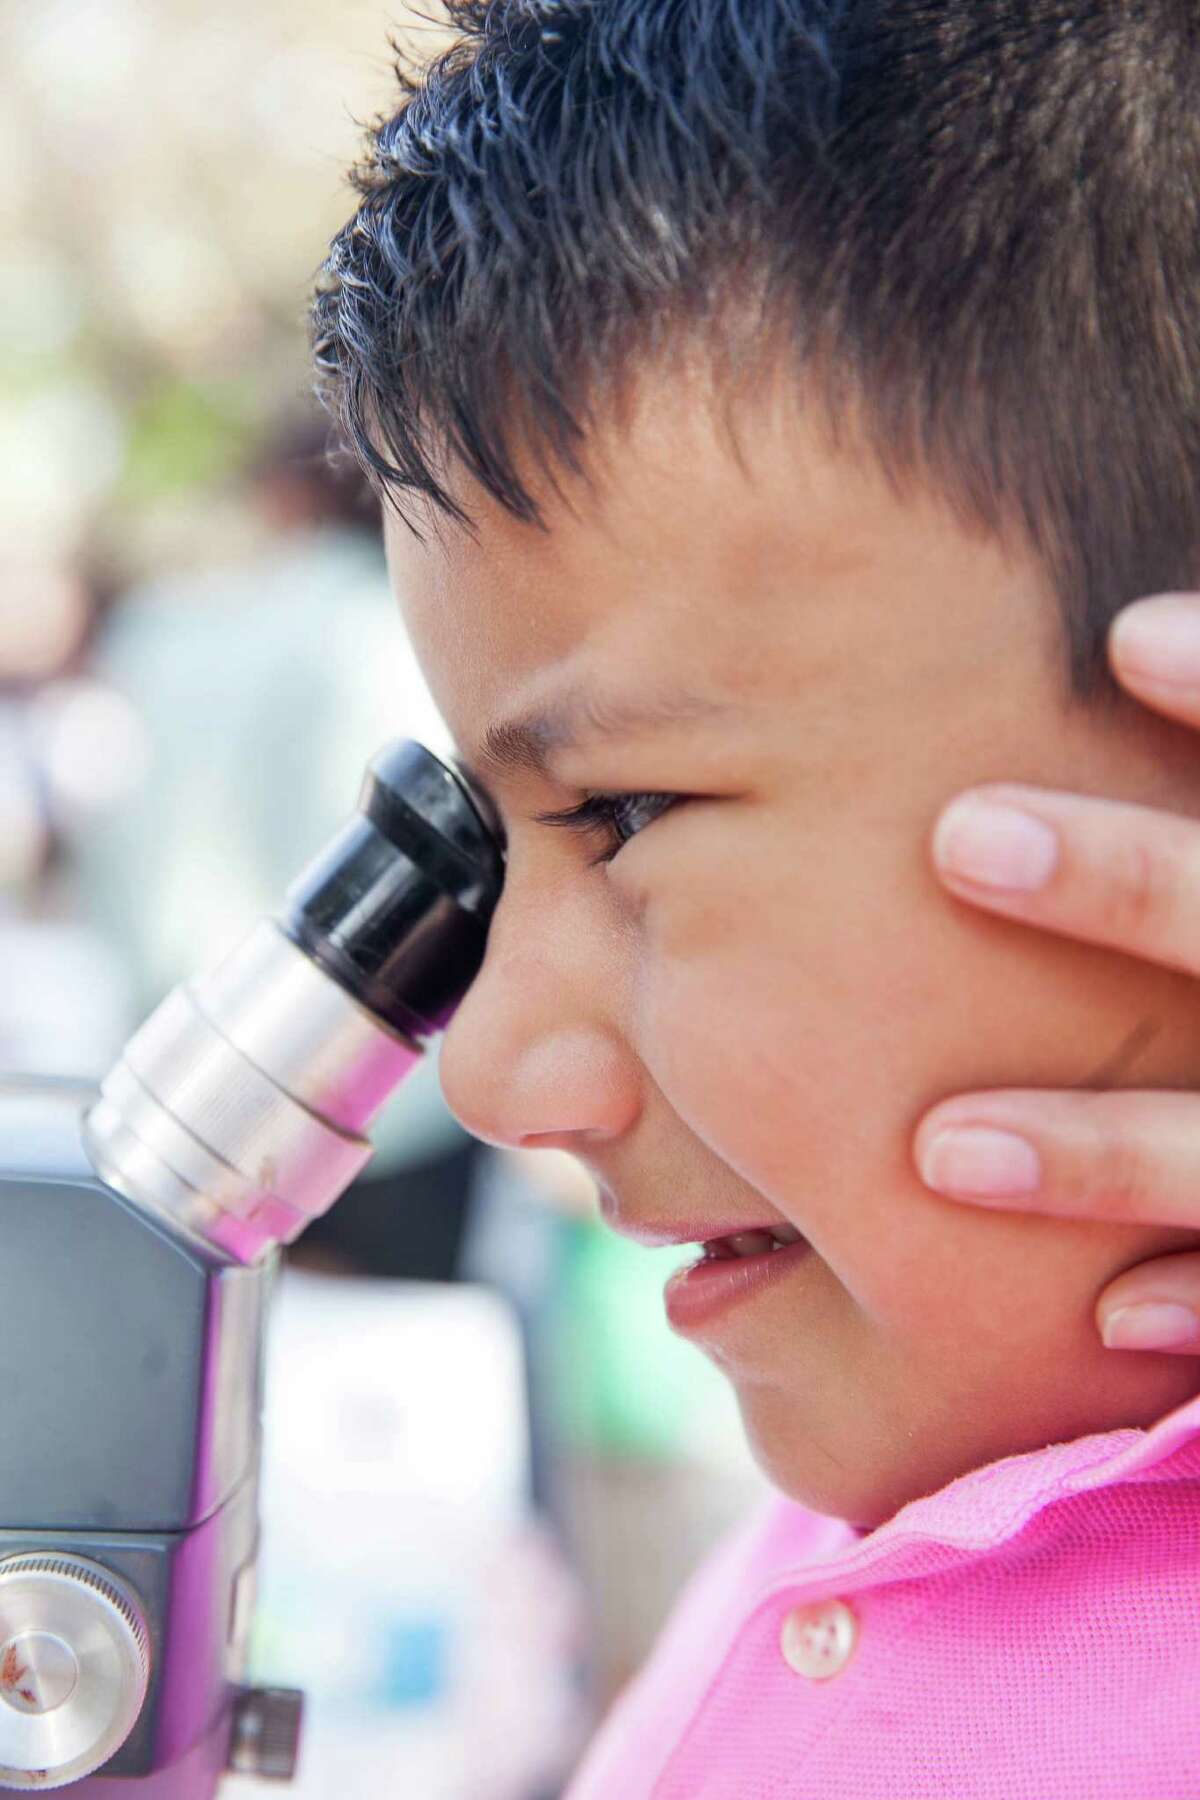 Giovanni Garcia, 5, has some help from his godmother as he tries to view an ant through a microscope at the Sigma XI, The Scientific Research Society stand Saturday March 5, 2015 during the 2016 Science Fiesta, organized by the UT Health Science Center at La Villita.